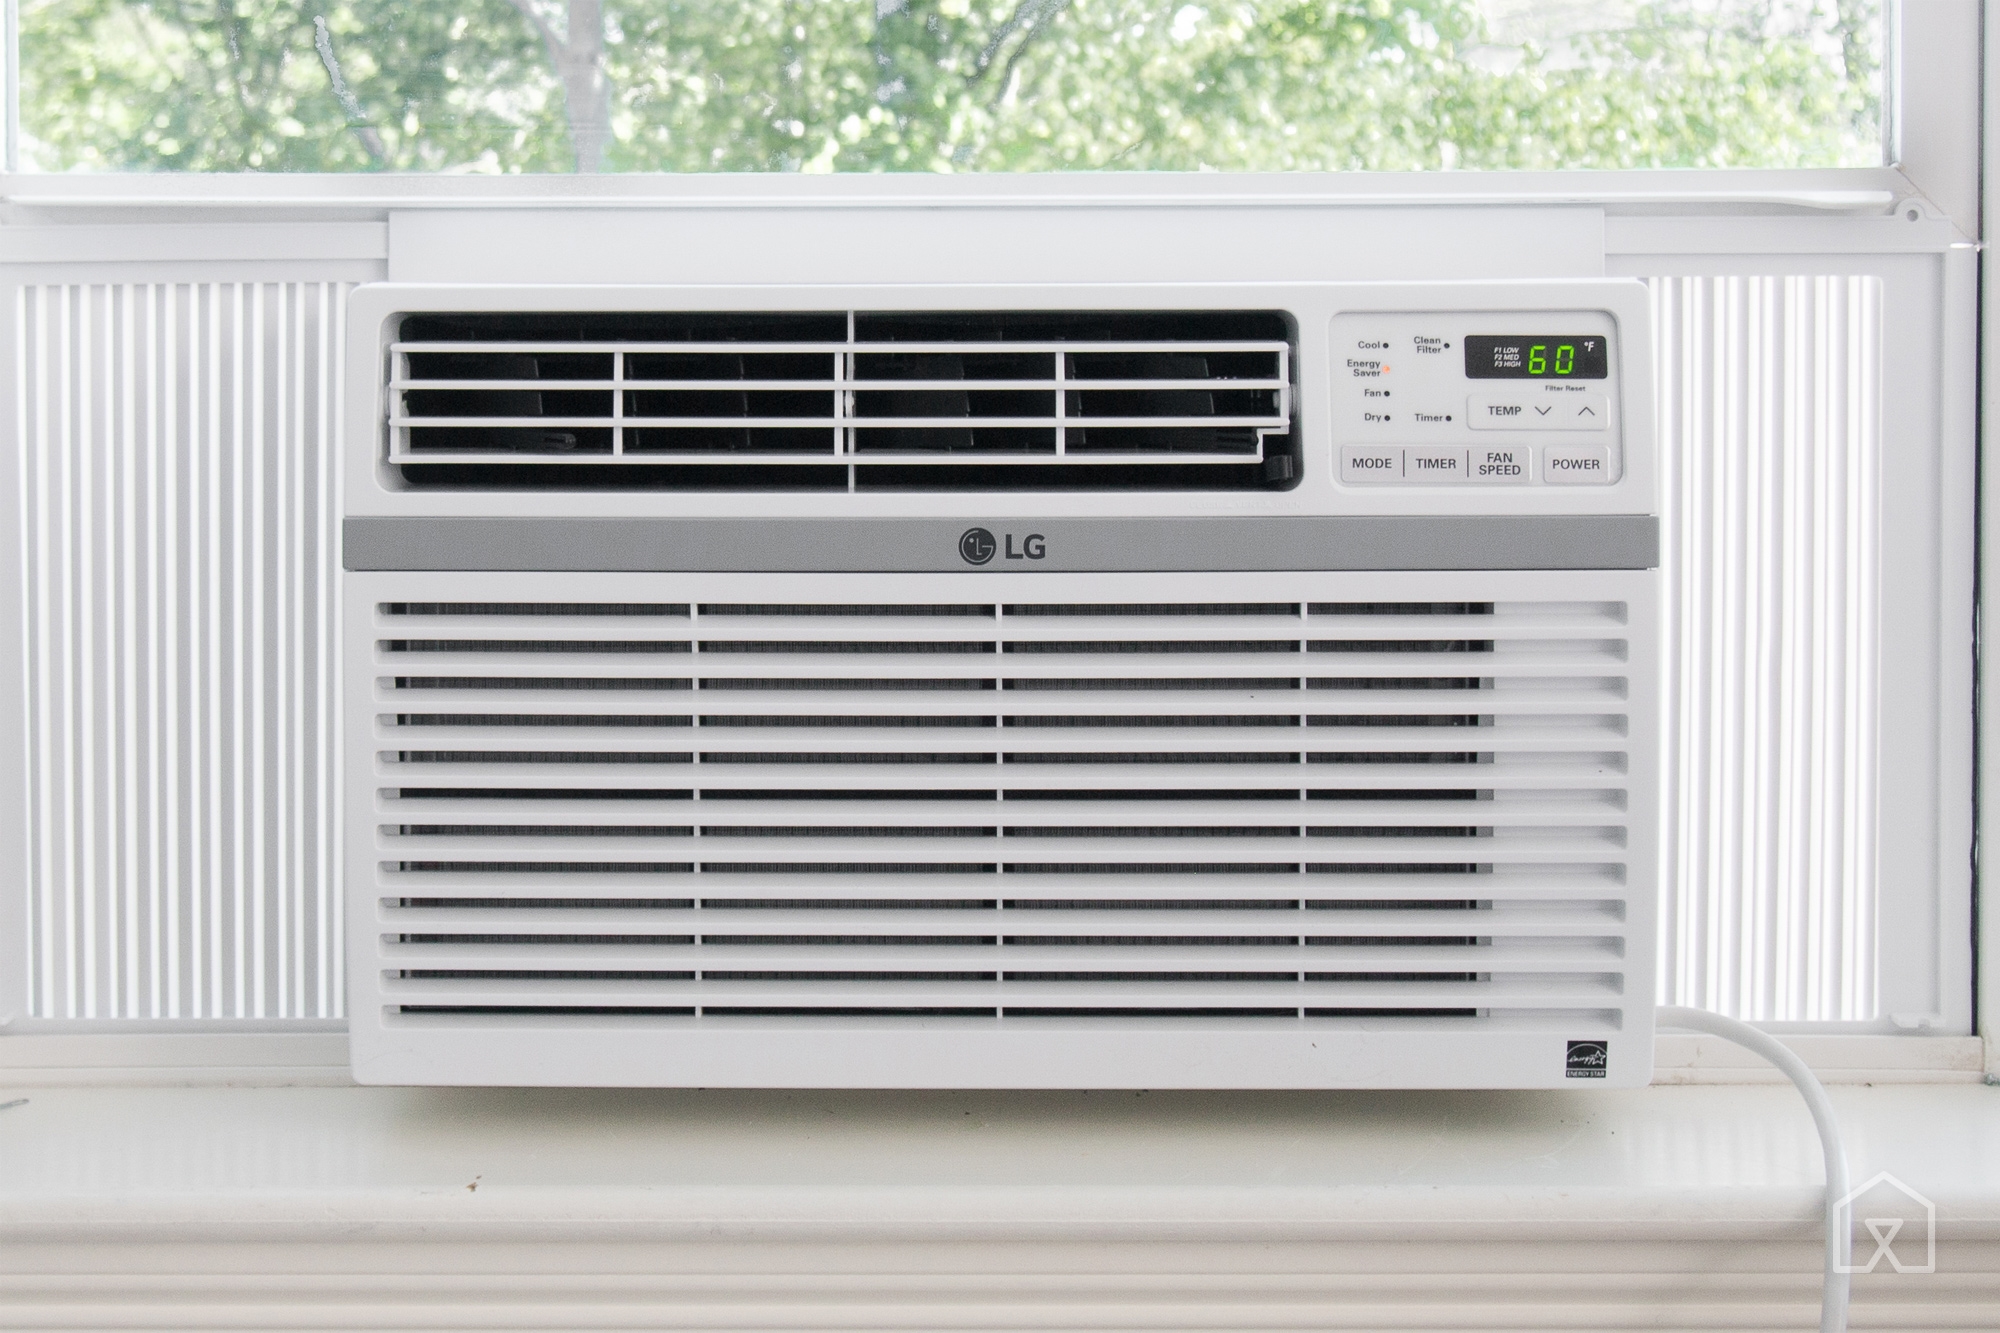 The best air conditioner | DeviceDaily.com